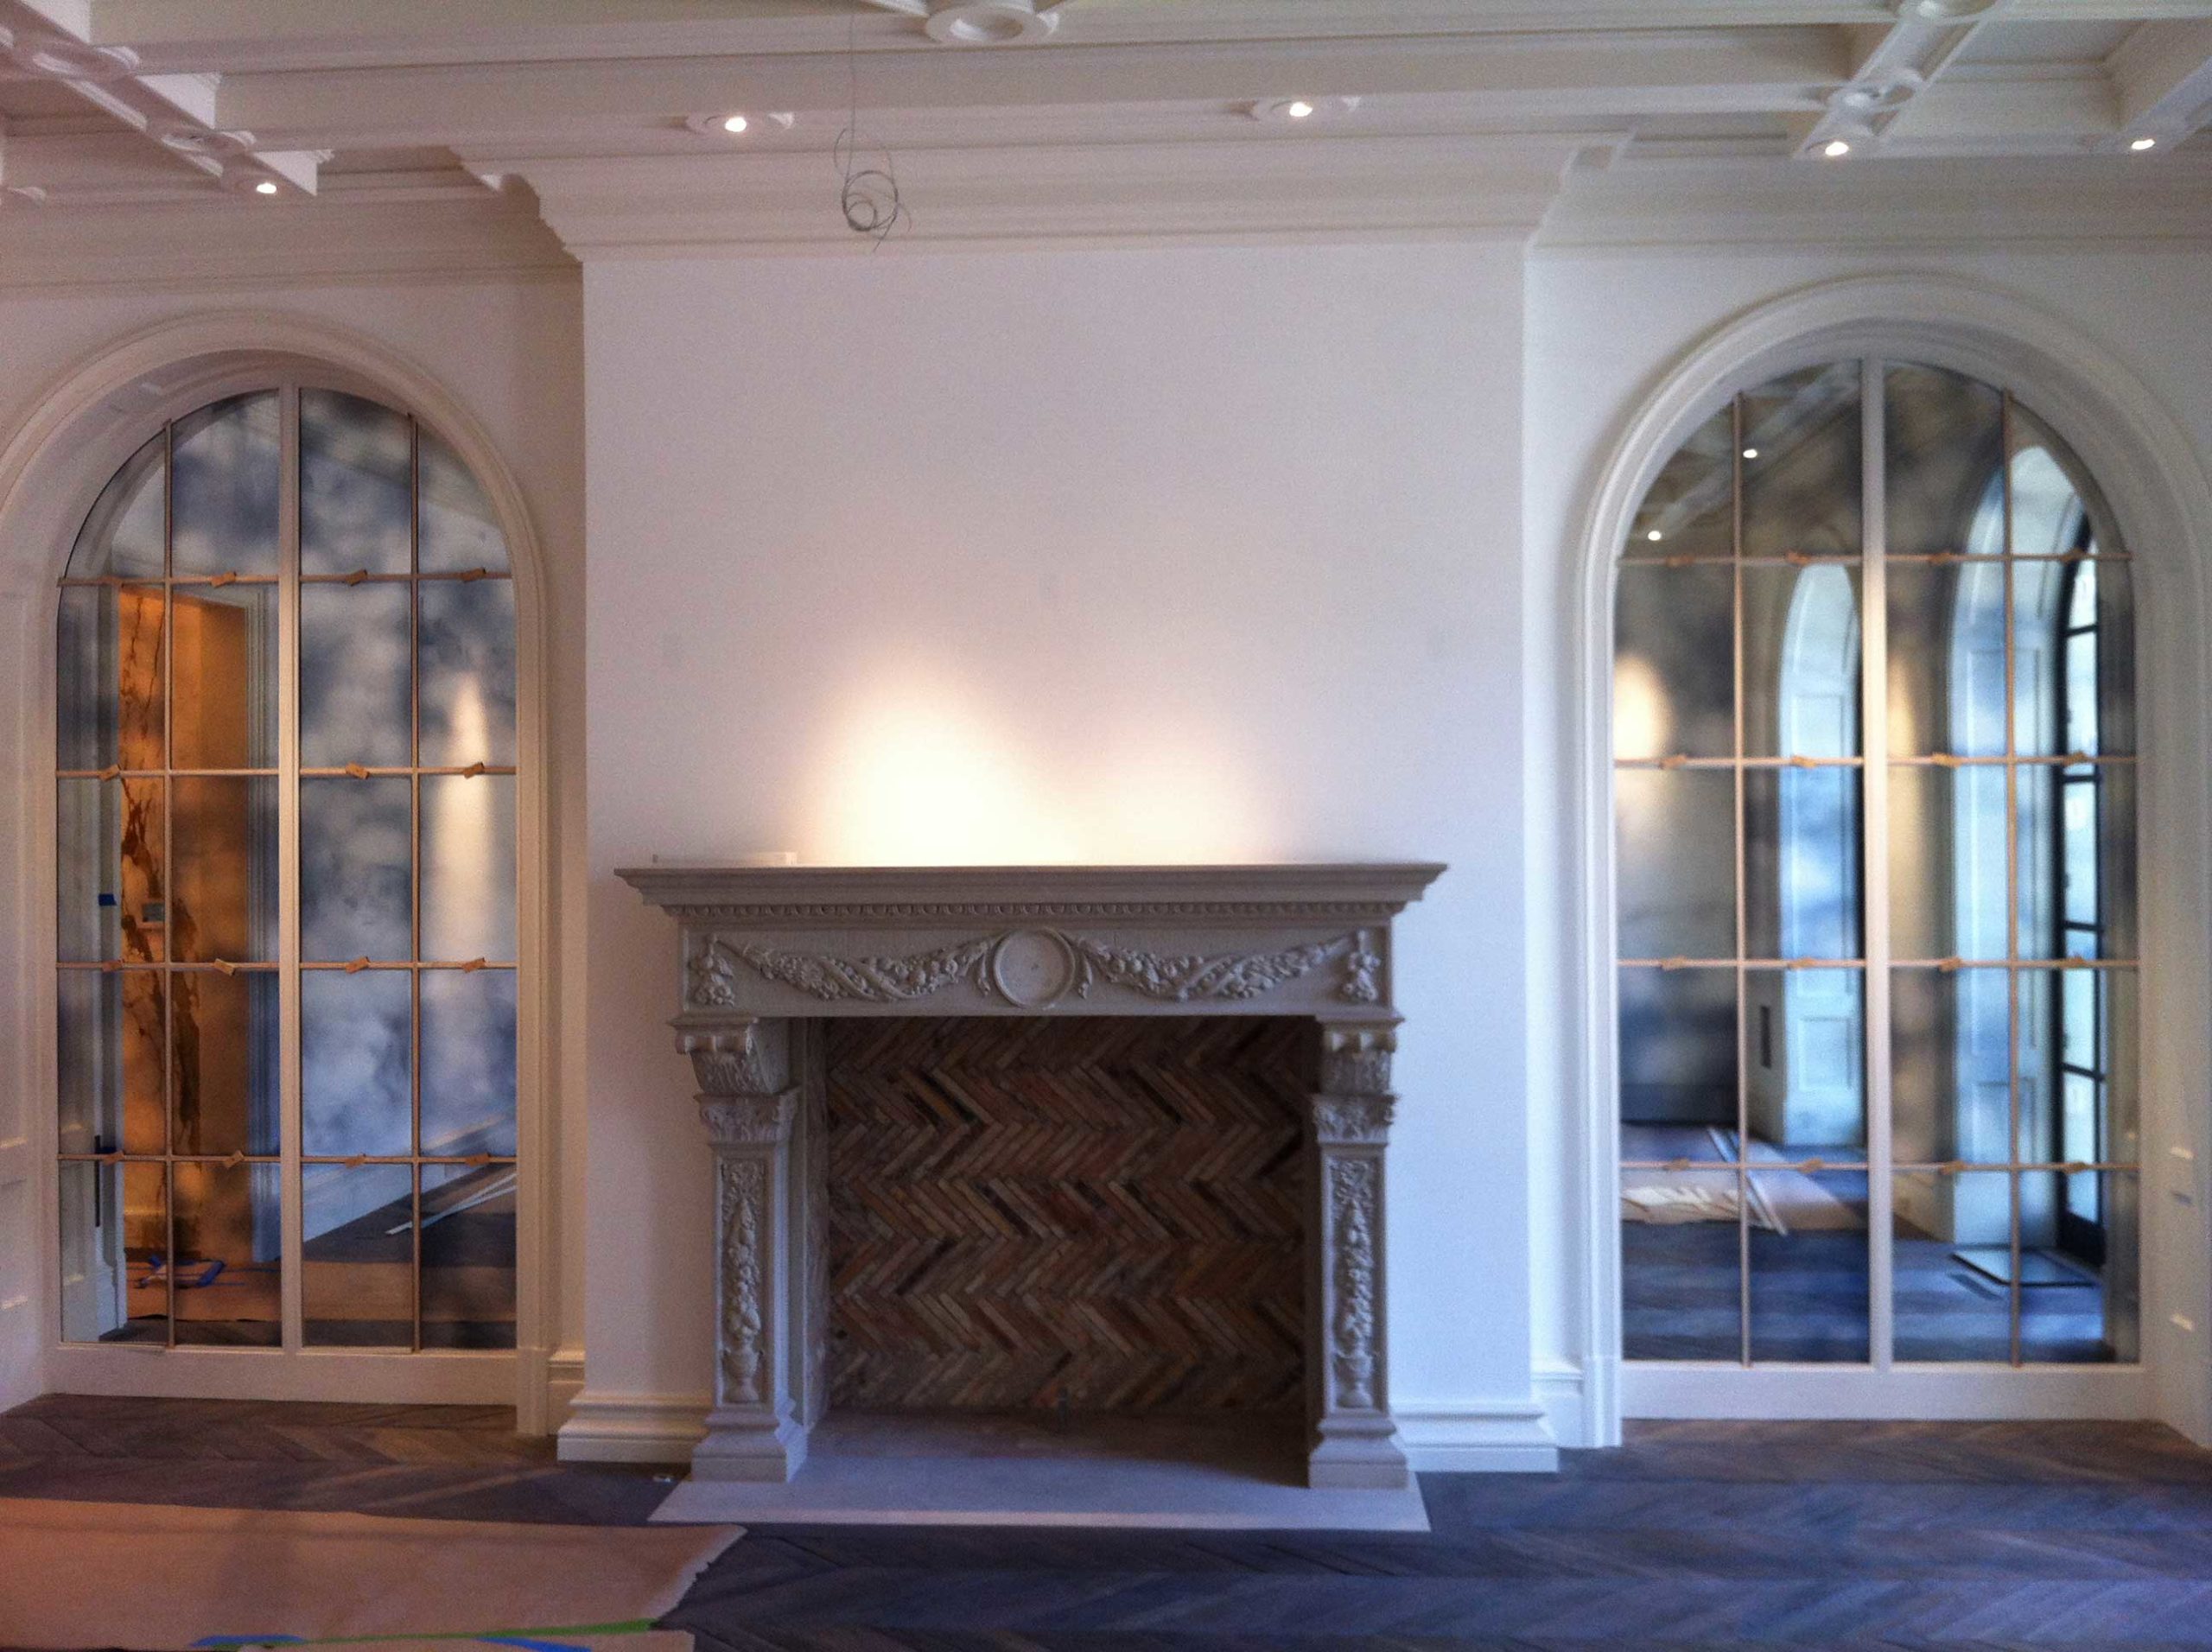 Decorative antique glass mirrors on each side of fireplace